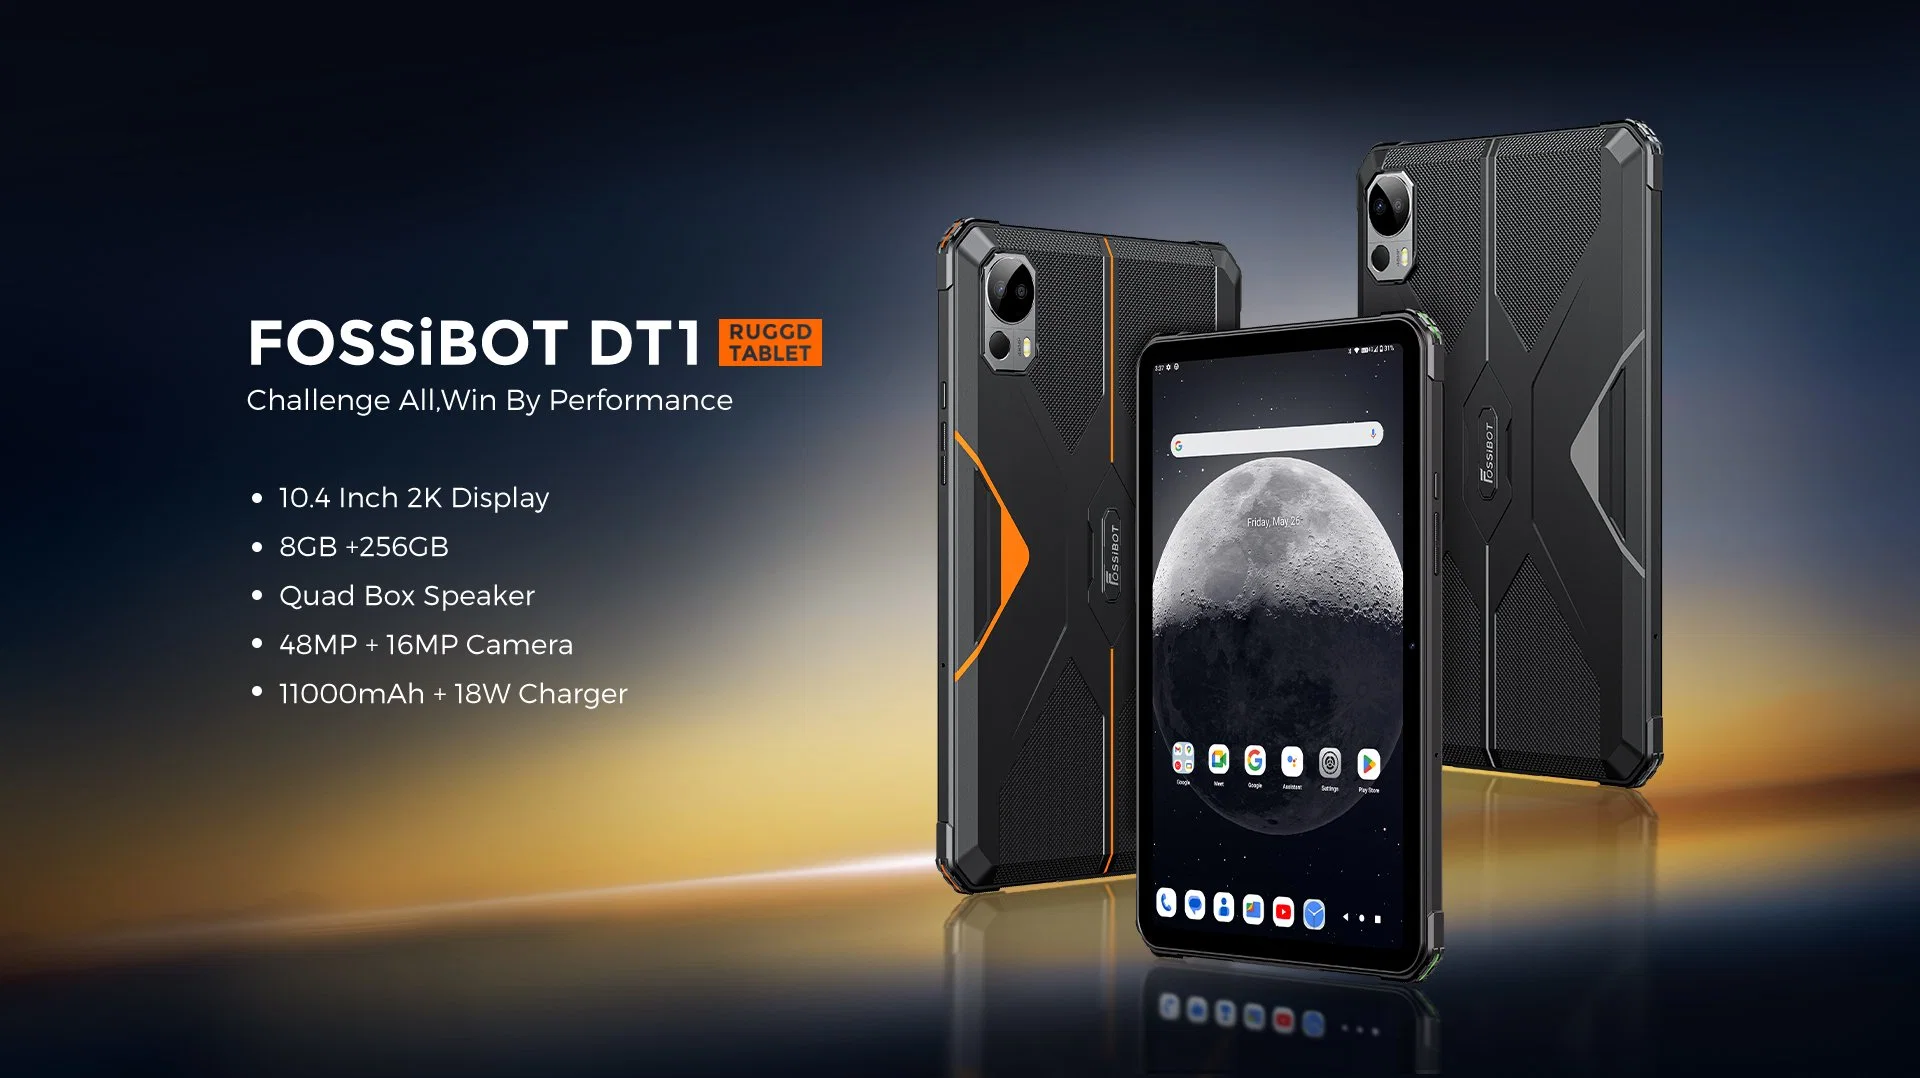 Fossibot Dt1 Rugged Tablet 10.4"FHD+ 11000mAh 8GB+256GB Android 13 Tablets 48MP Camera 33W Charge Pad